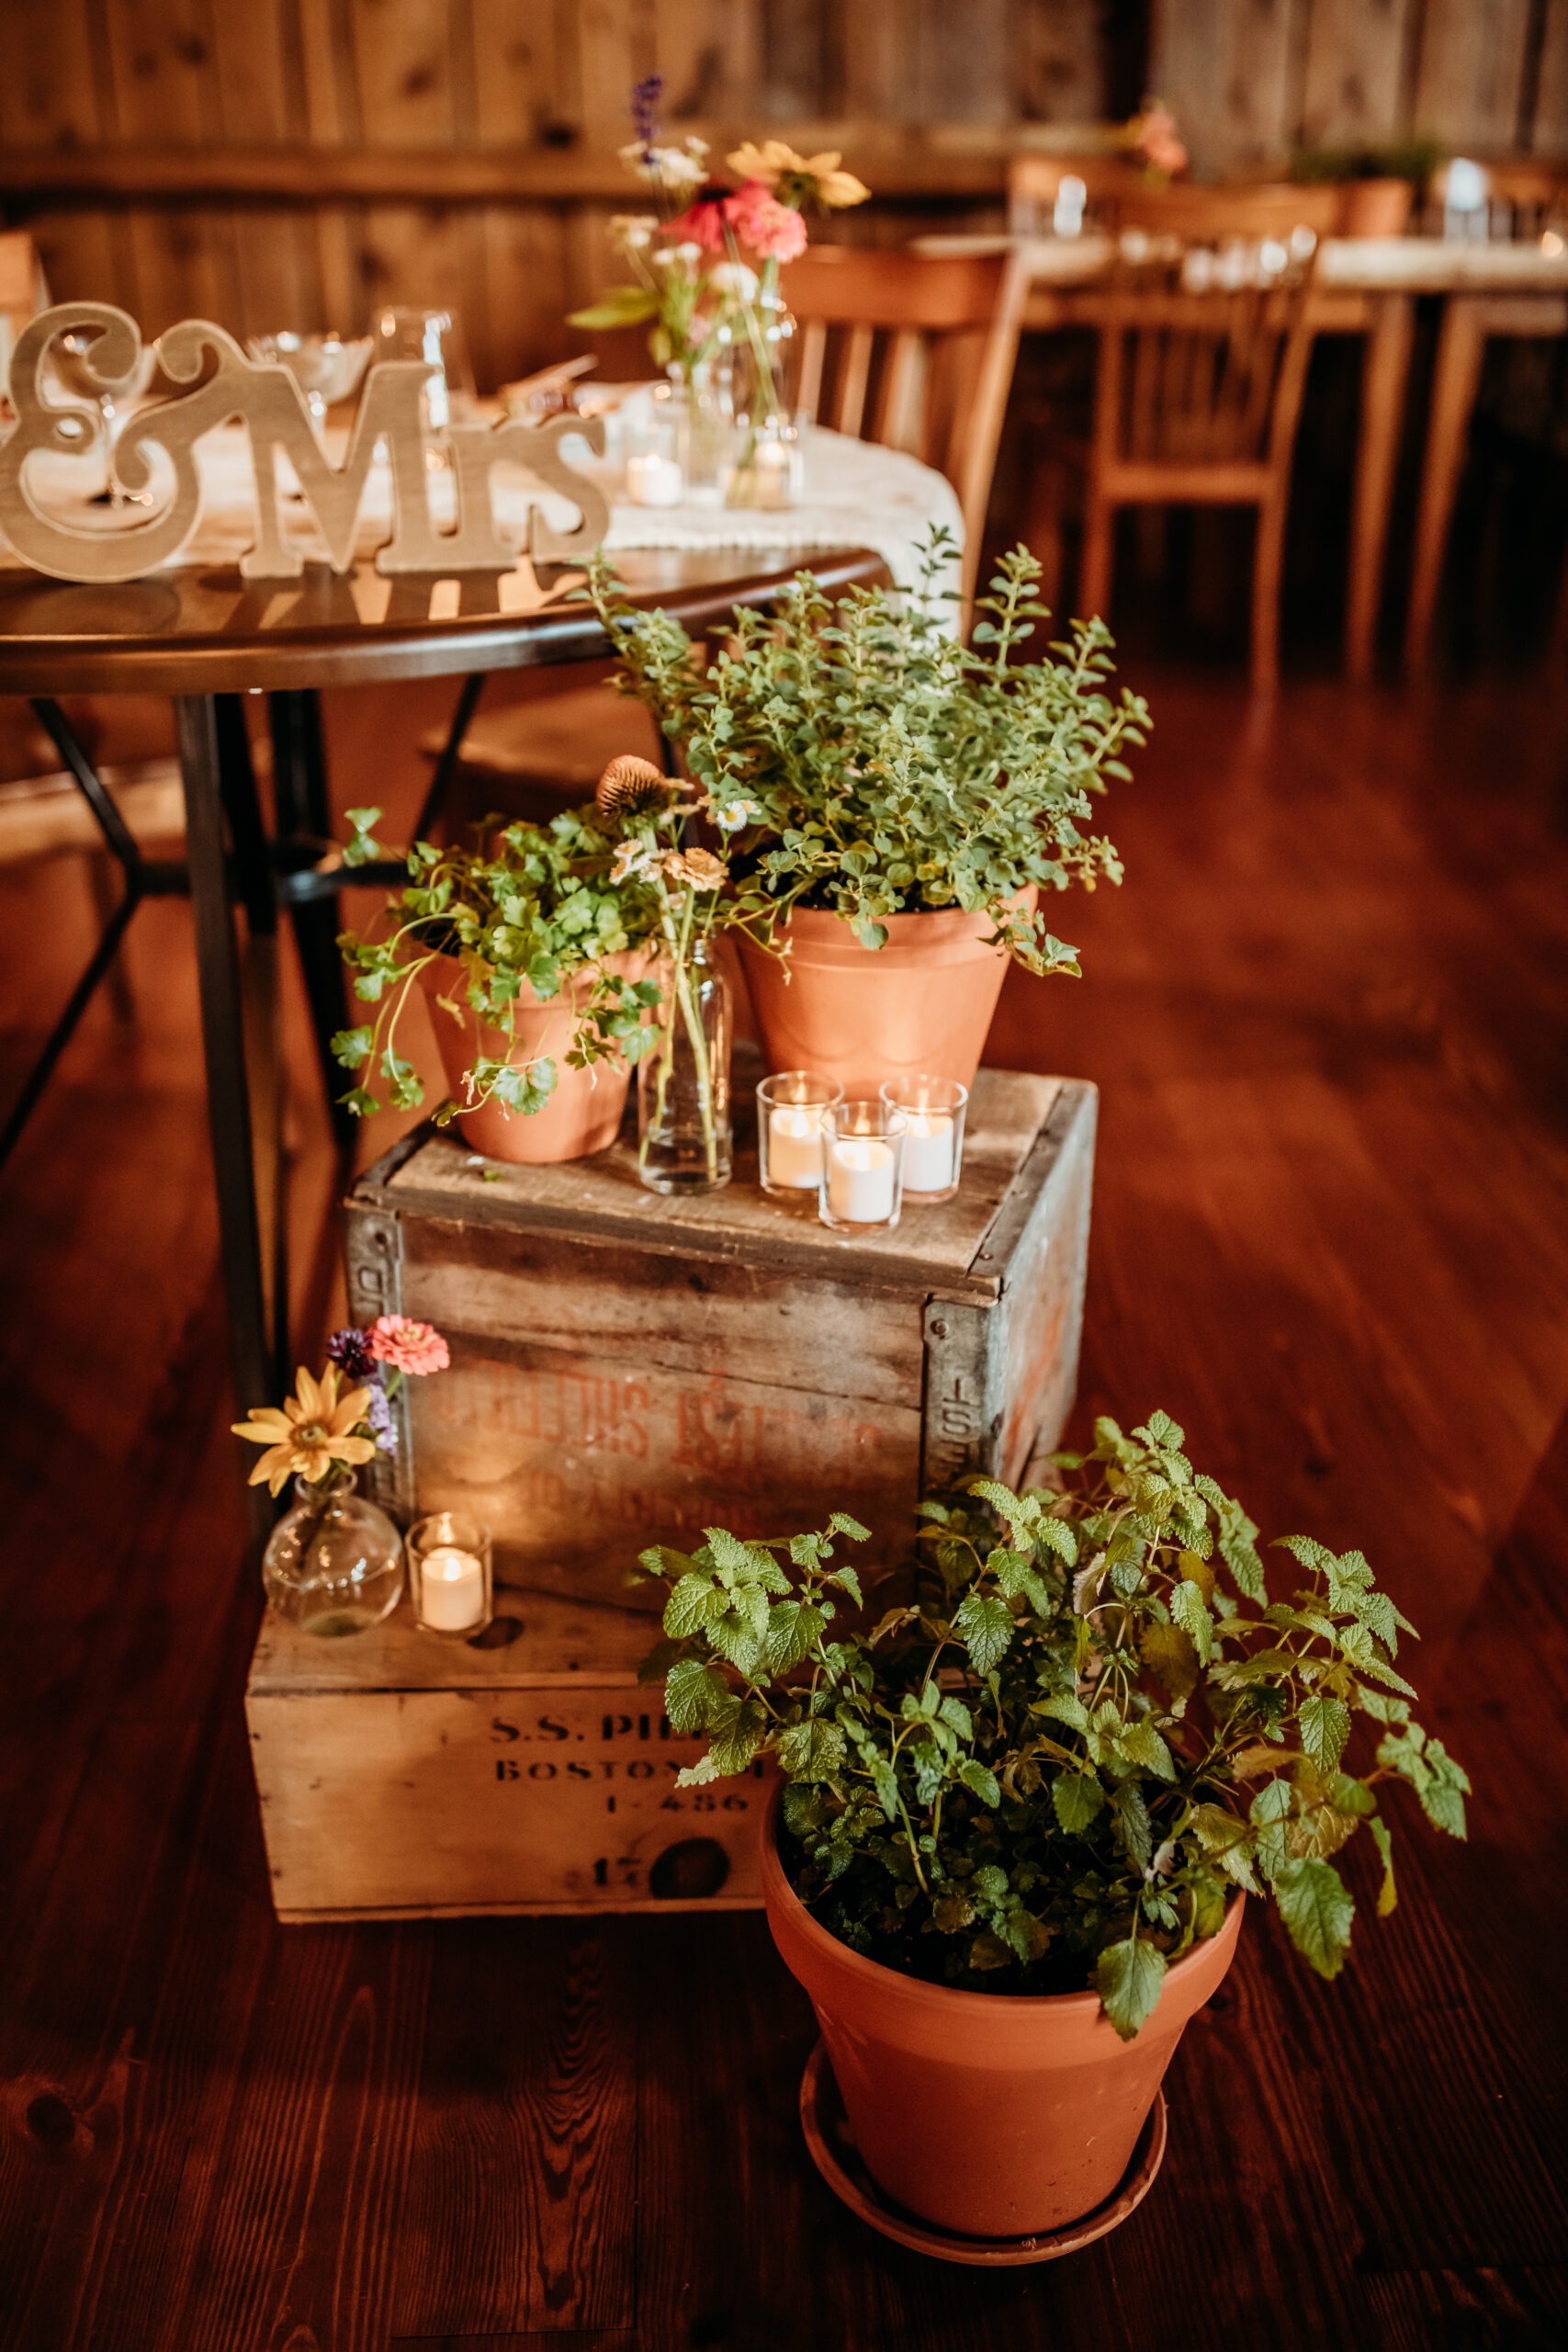 Wooden crates and potted plants surrounding the bride and groom's table at a Vermont farmers market themed wedding